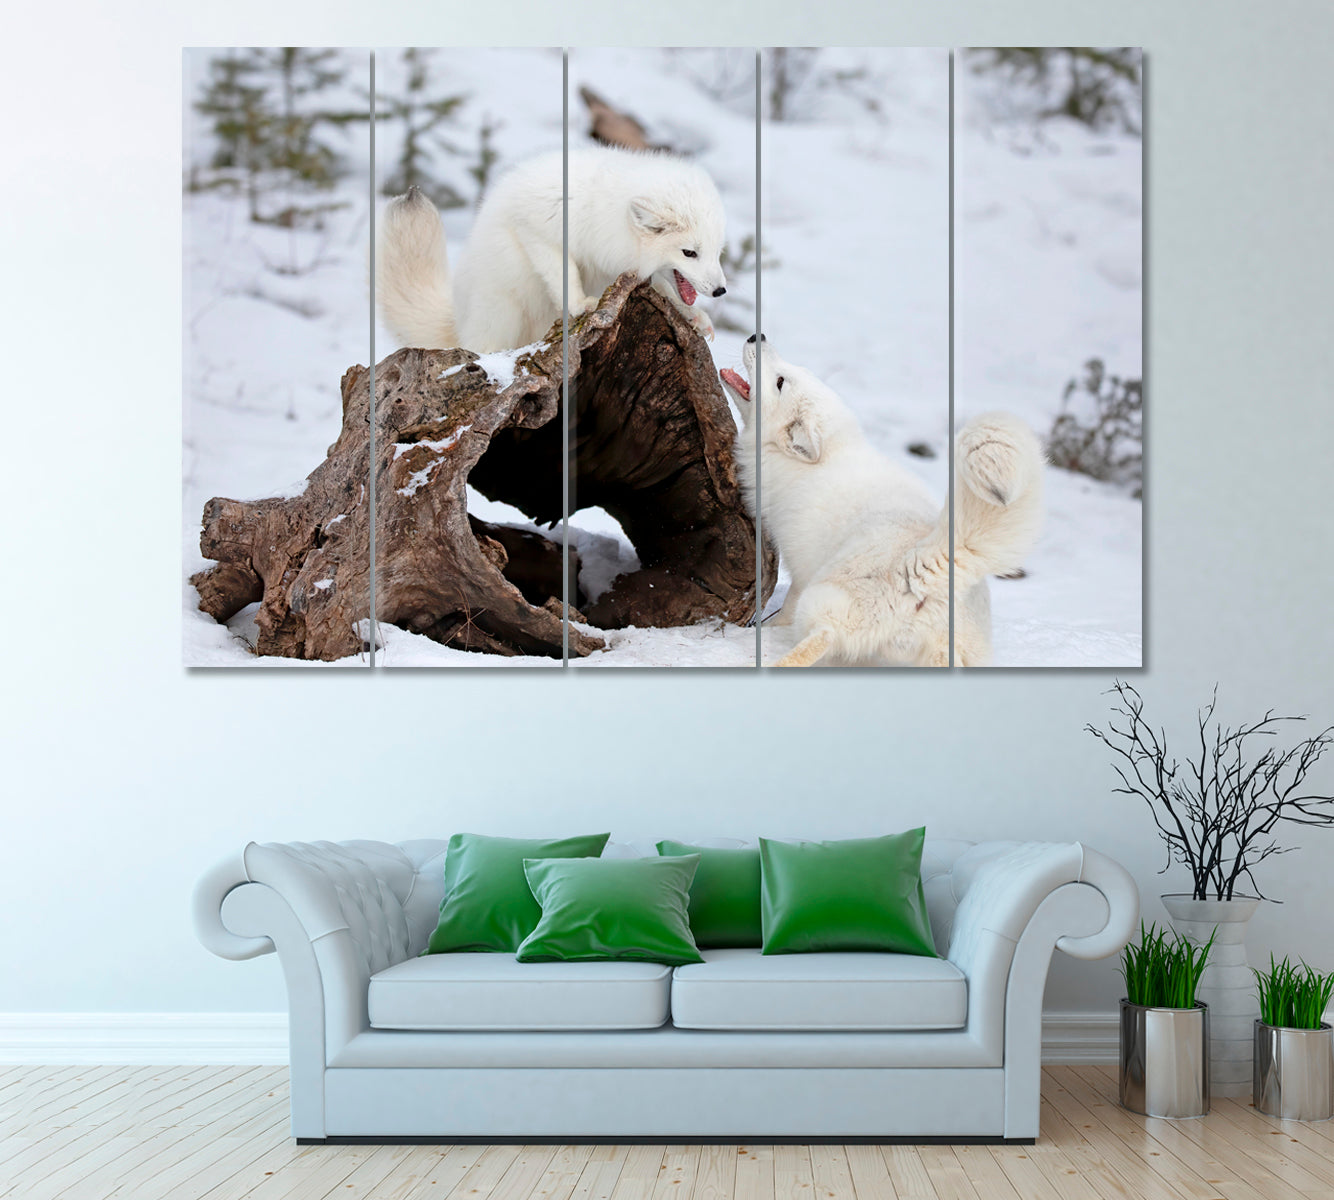 Two Arctic Fox Playing in Snow Montana USA Canvas Print ArtLexy 5 Panels 36"x24" inches 